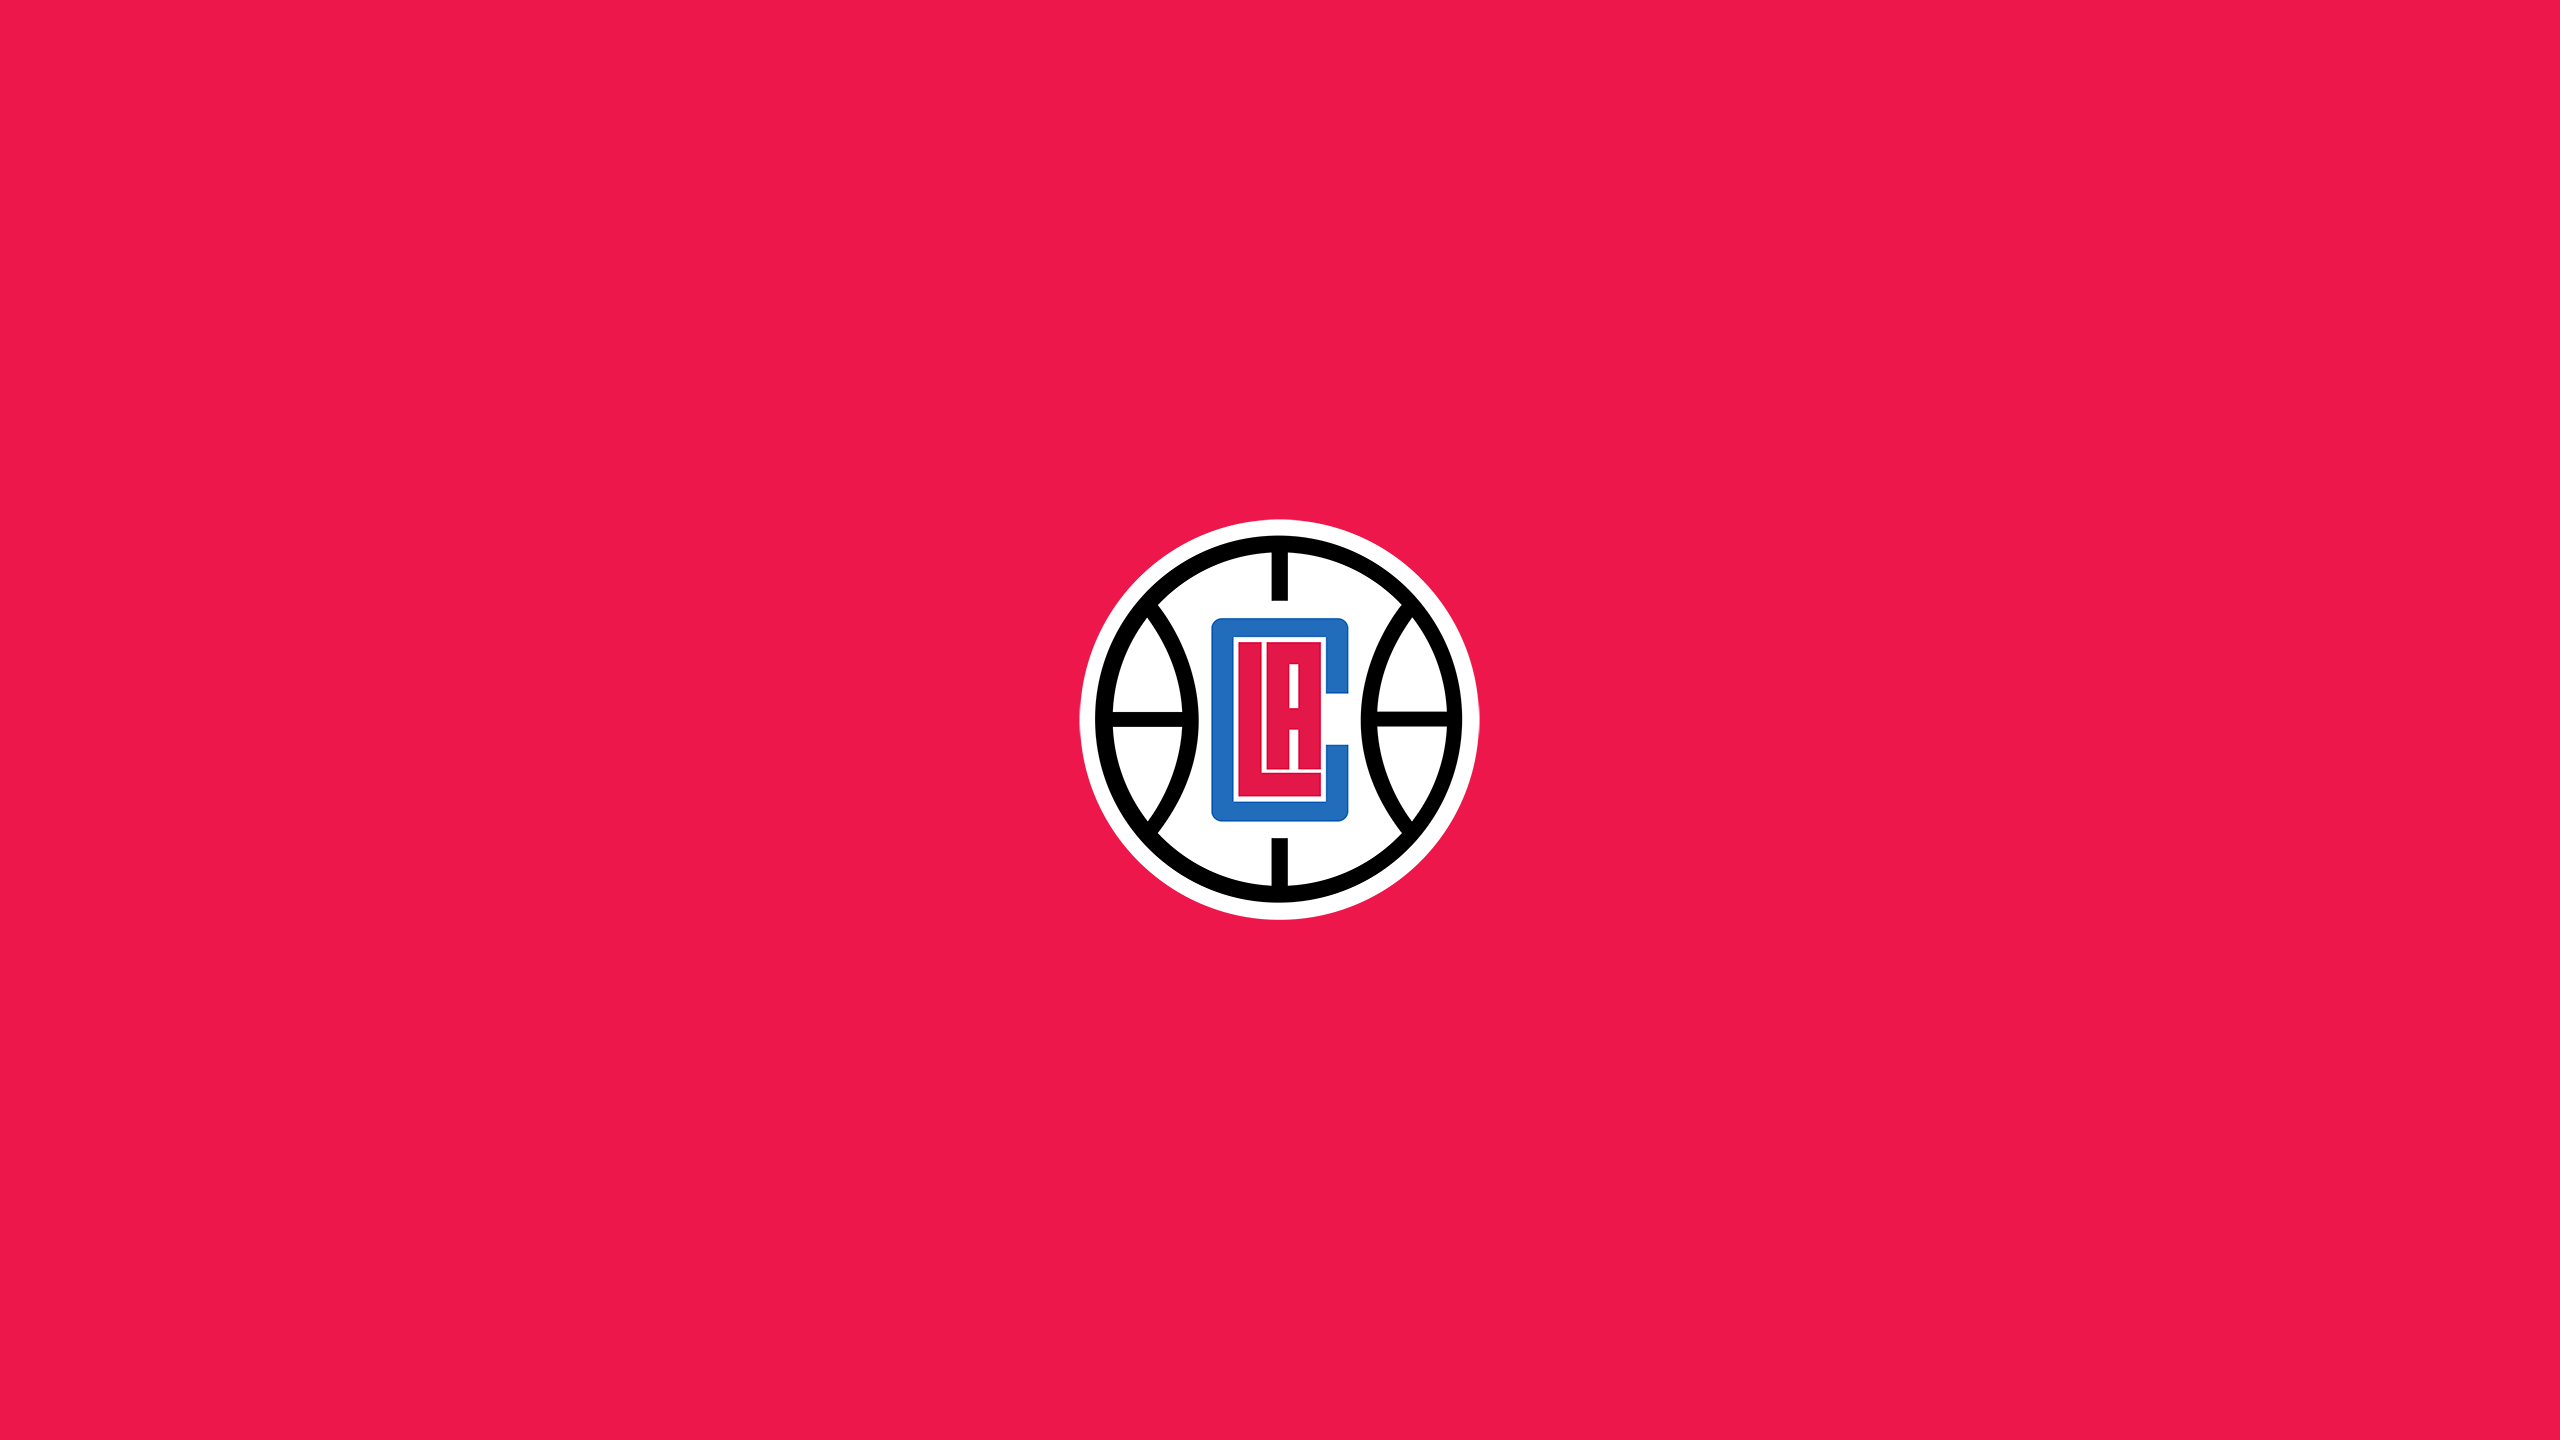 Los Angeles Clippers - Basketball & Sports Background Wallpapers